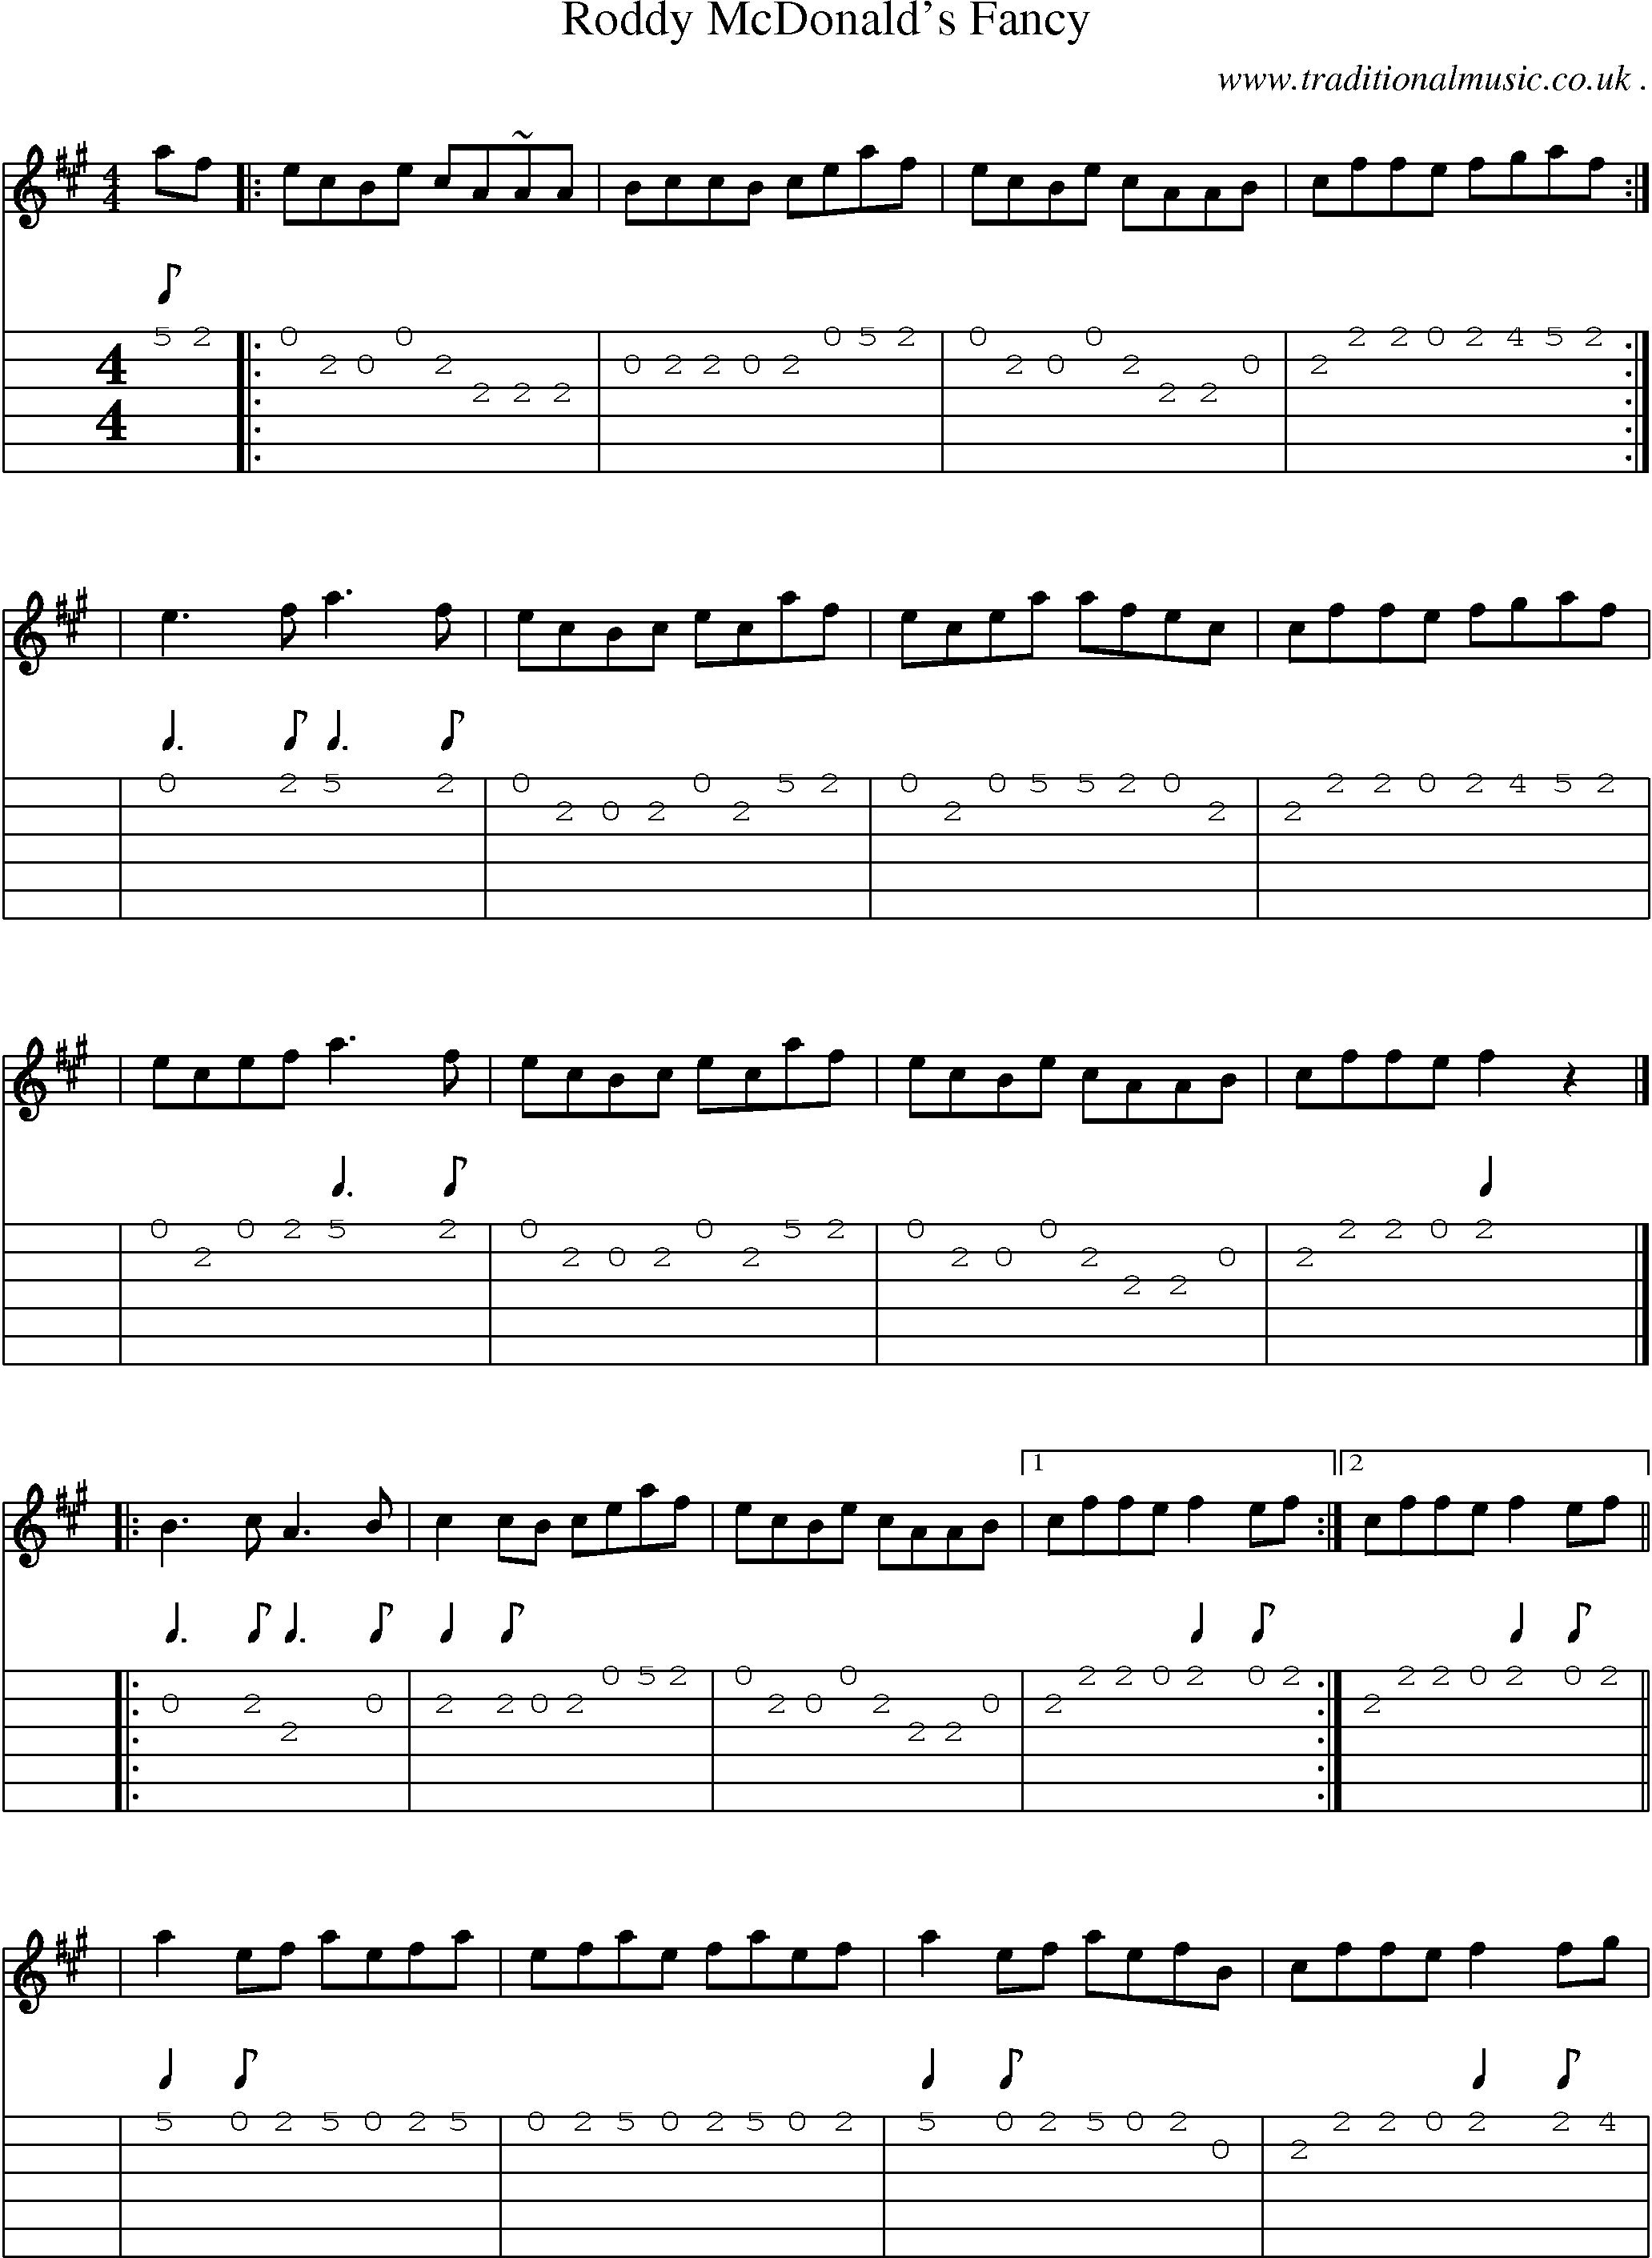 Sheet-music  score, Chords and Guitar Tabs for Roddy Mcdonalds Fancy